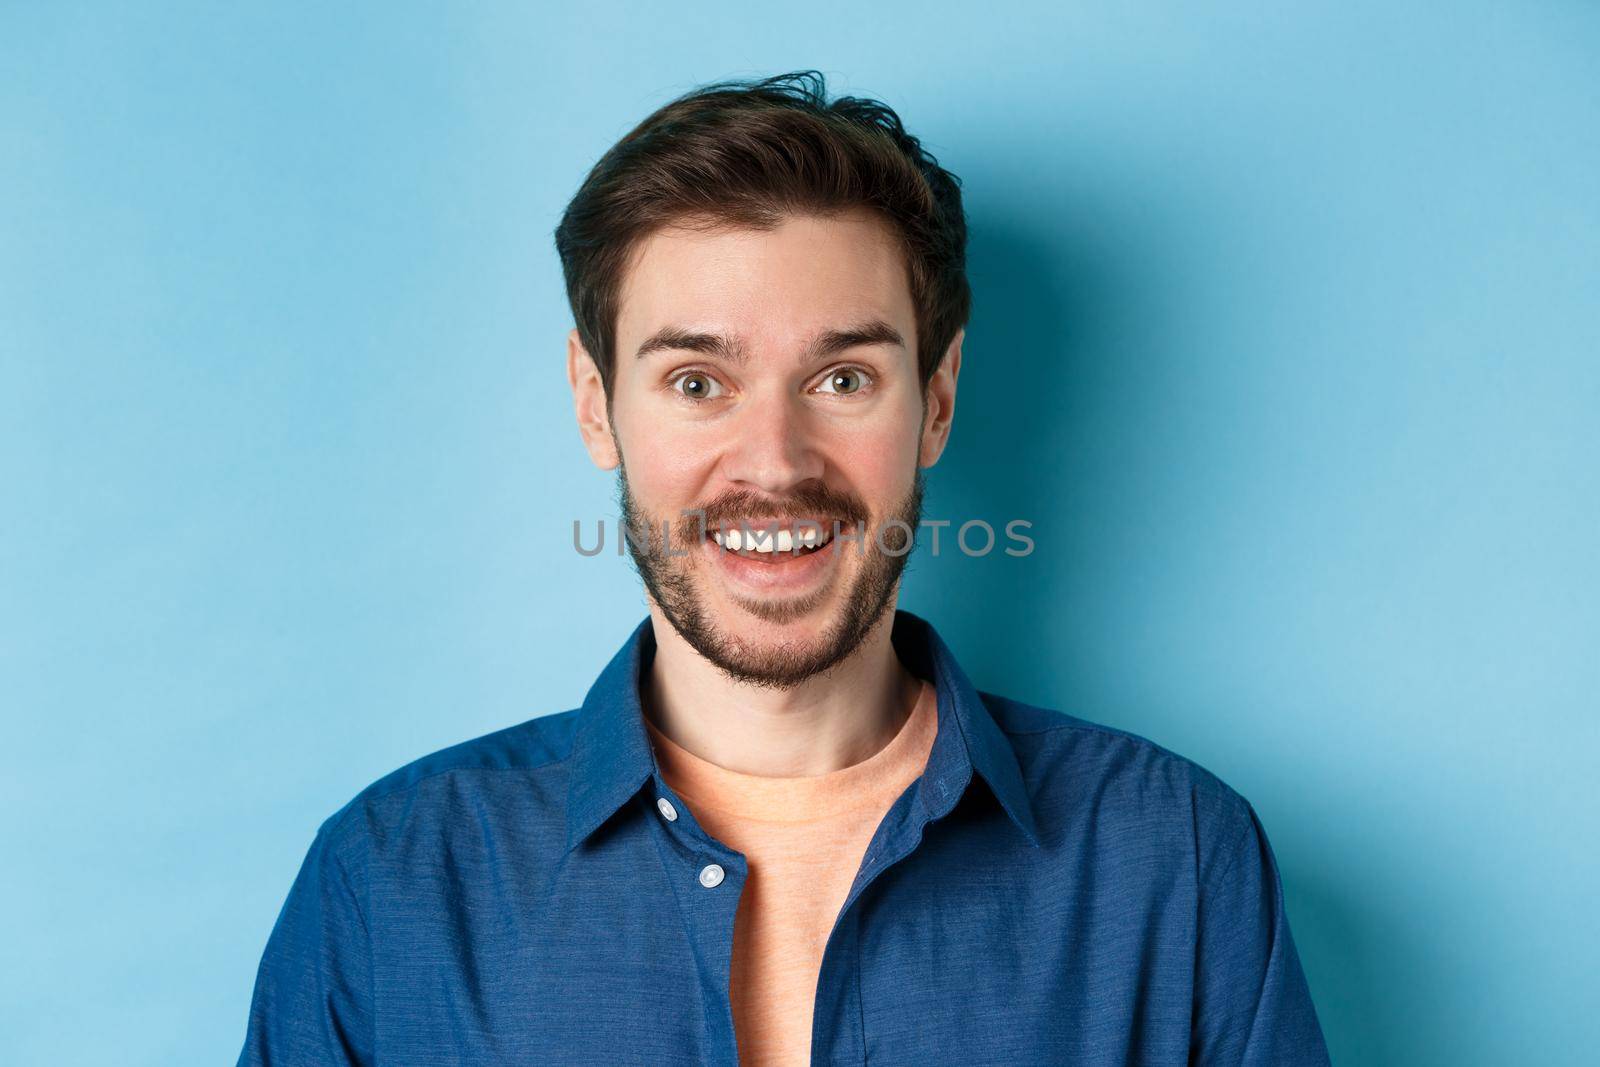 Close up of surprised handsome guy with beard looking amused, smiling happy at camera, standing on blue background.